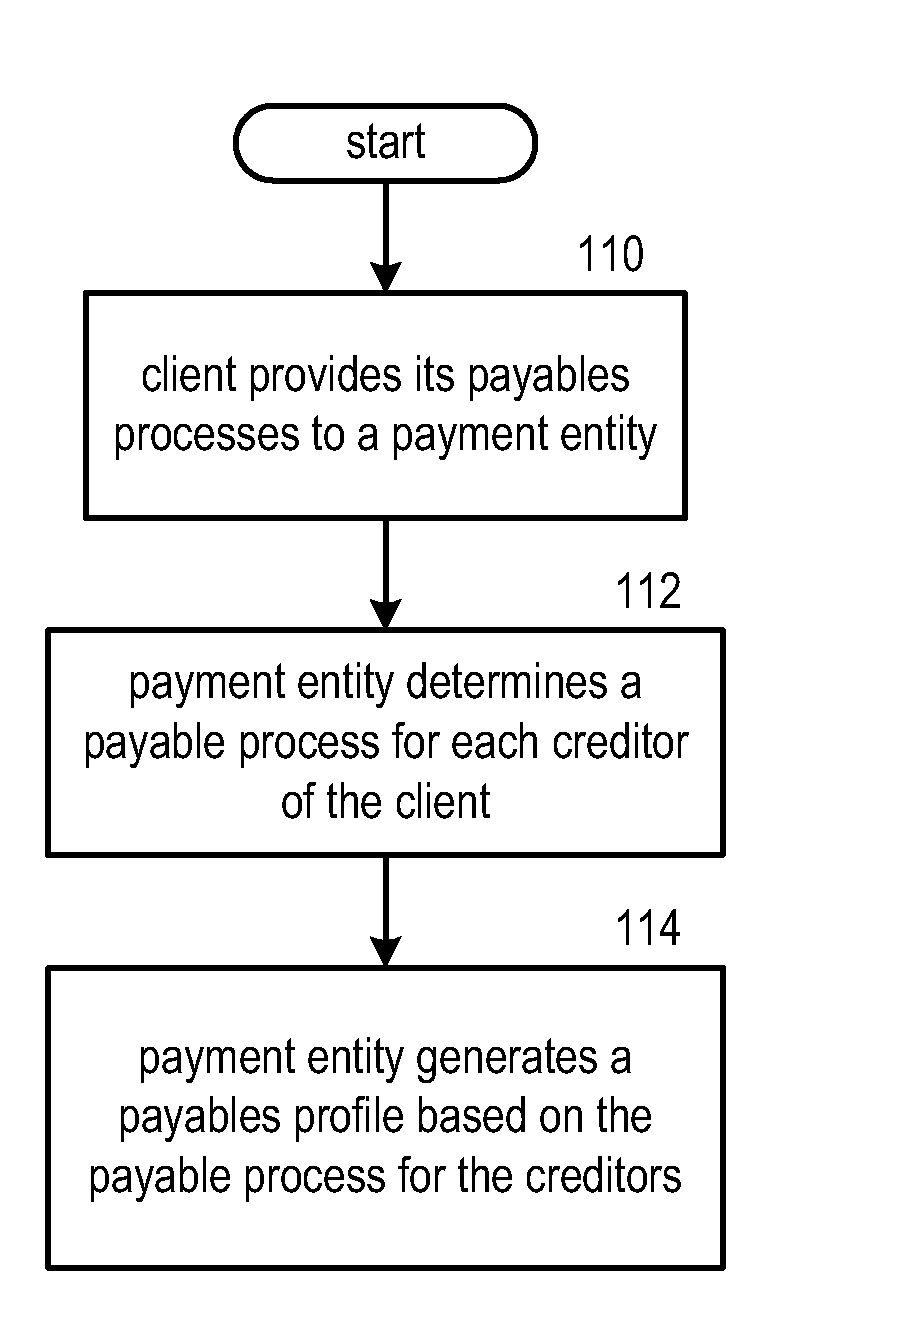 Payment entity account set up for multiple payment methods